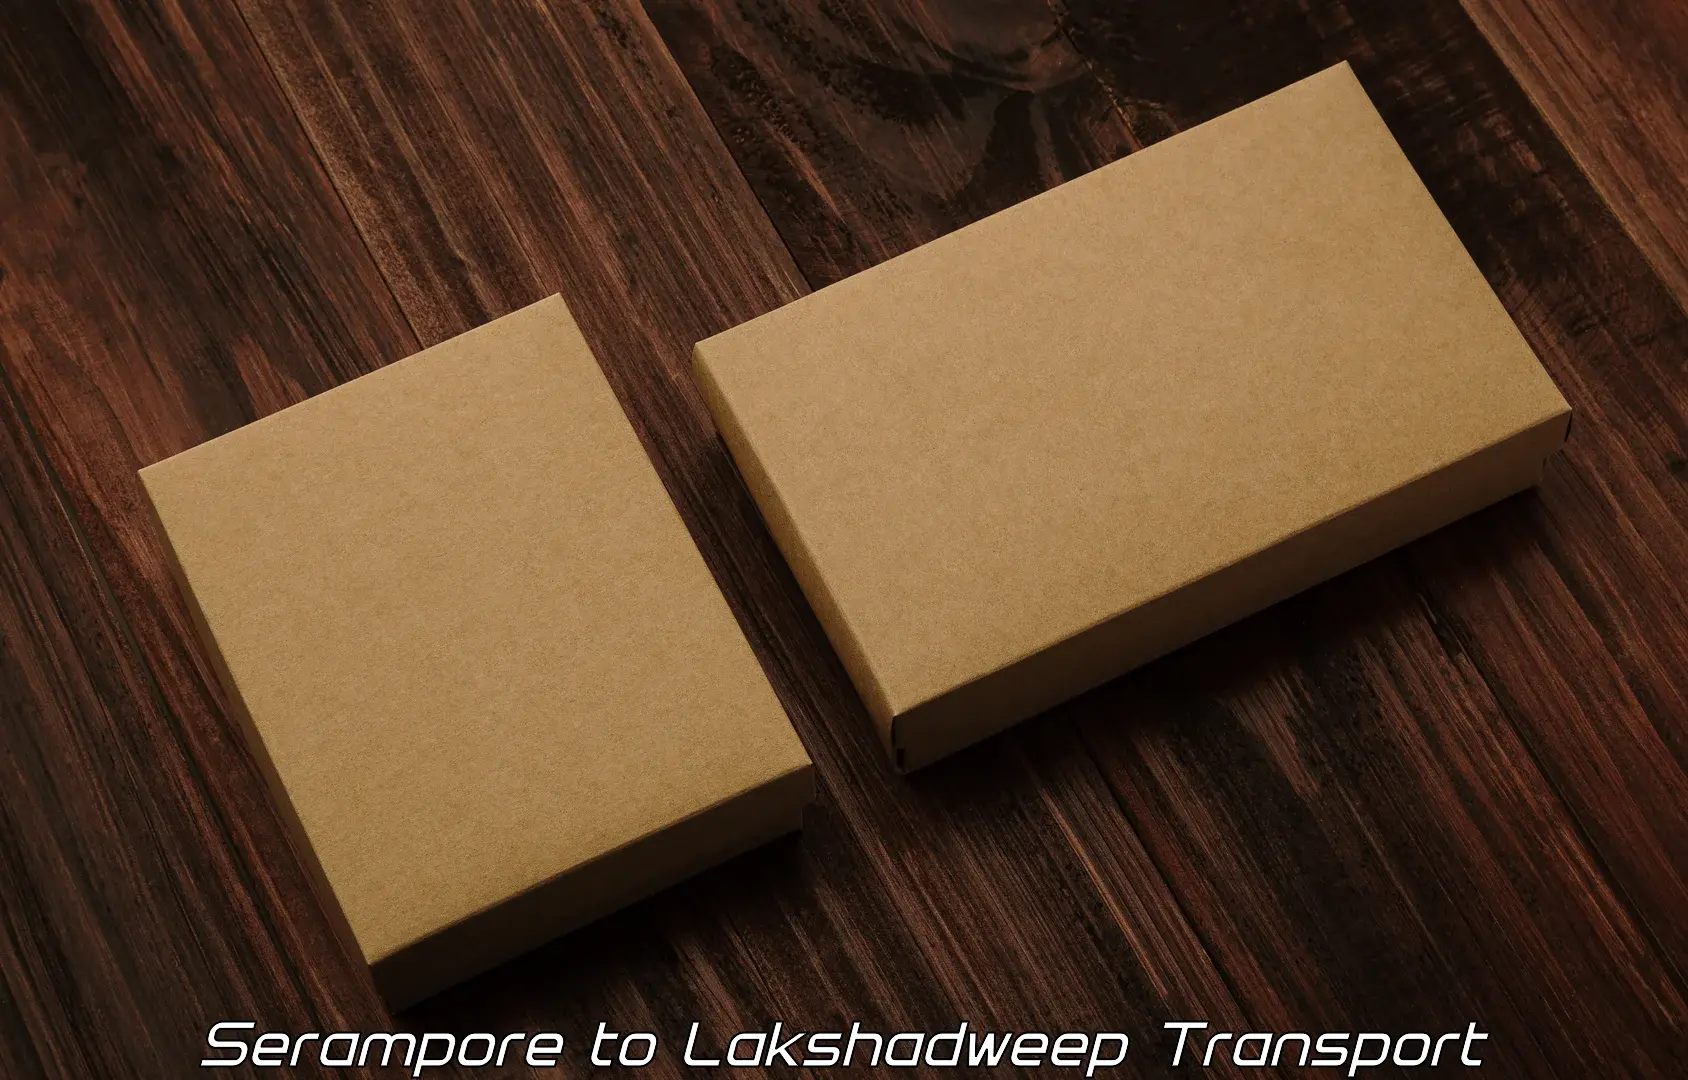 Container transport service Serampore to Lakshadweep